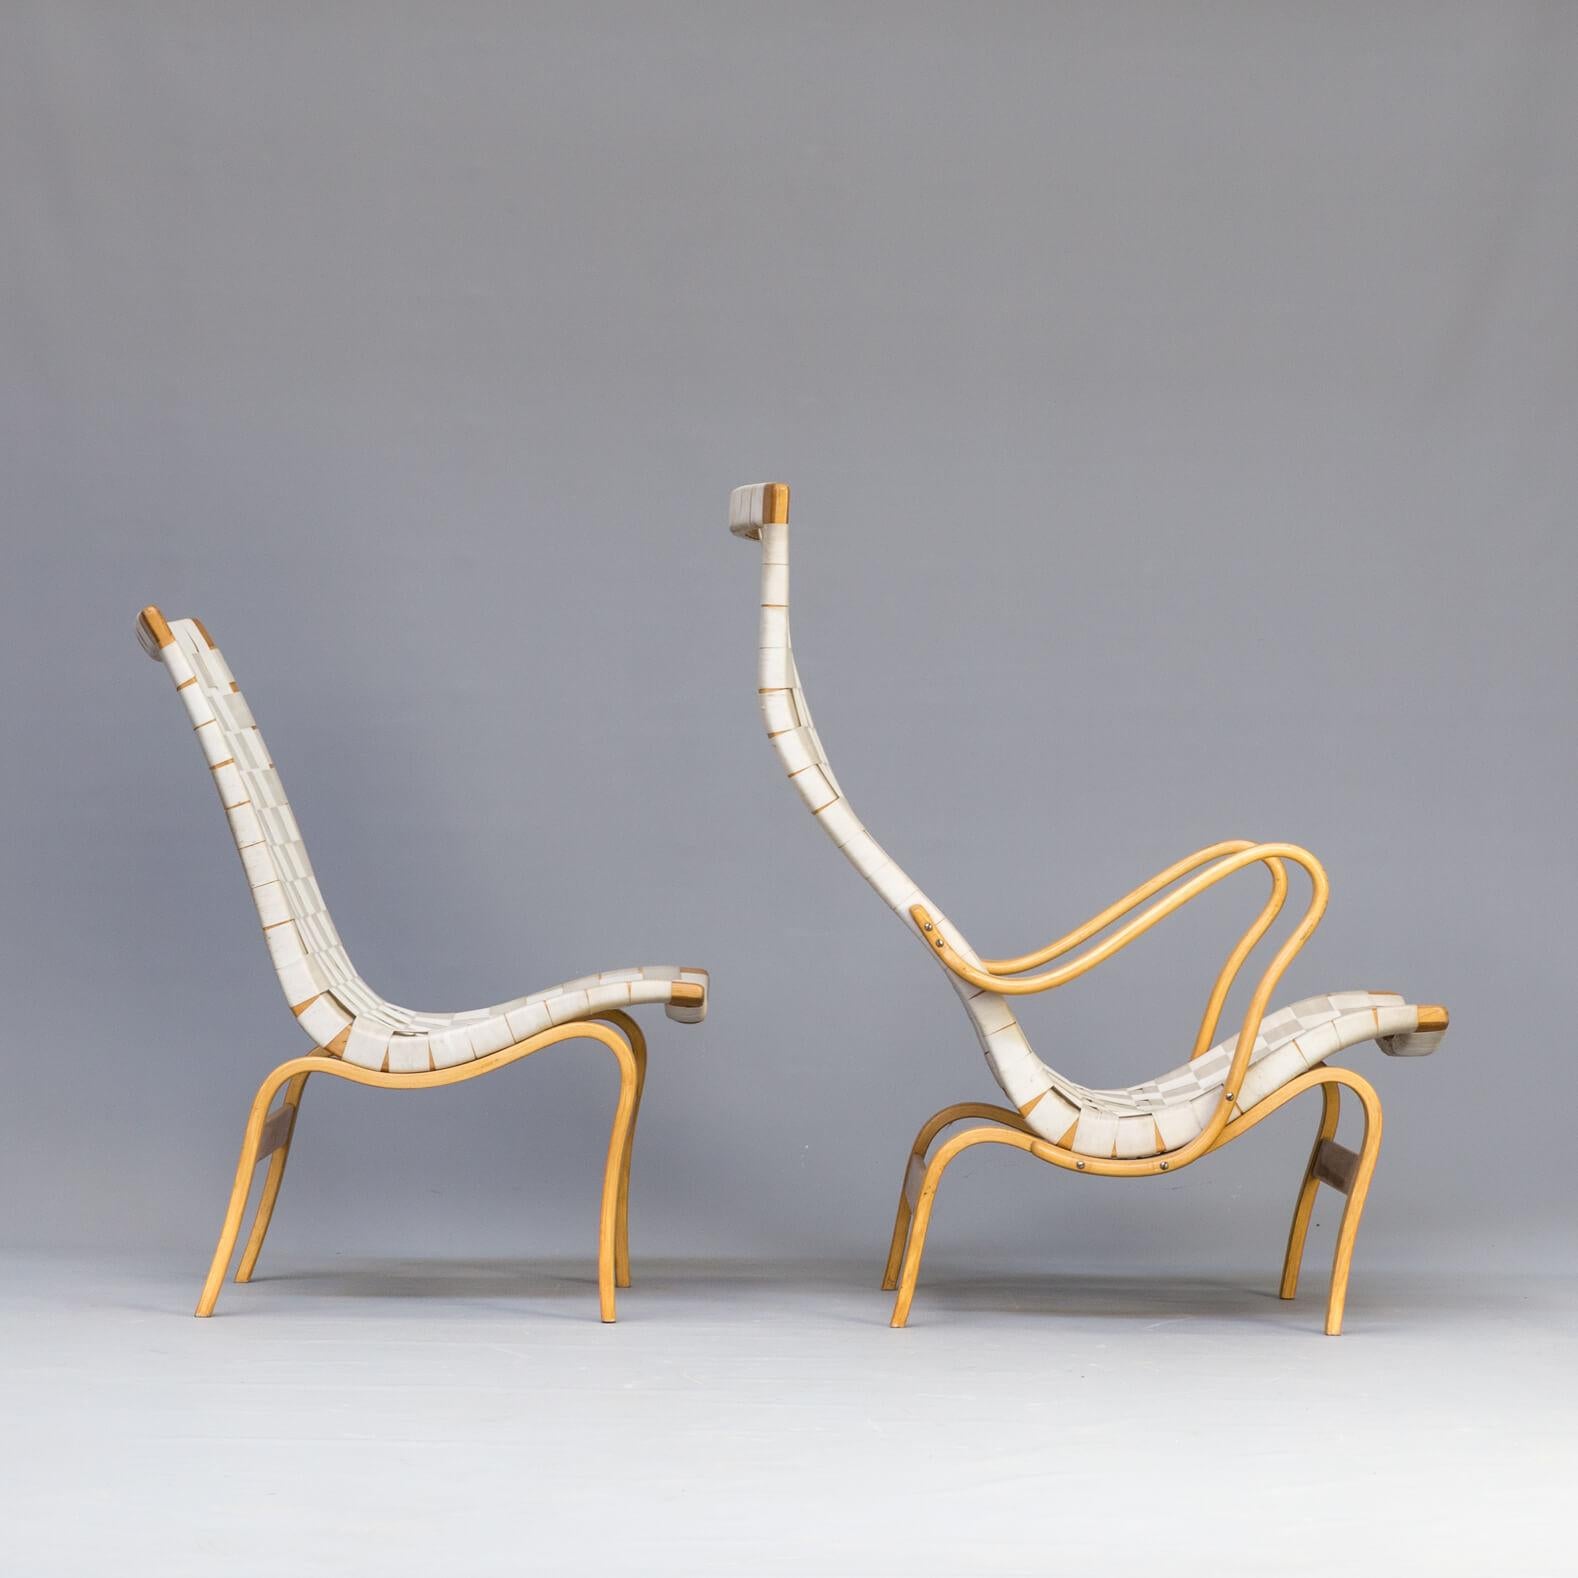 20th Century 1970s Bruno Mathsson ‘Pernilla’ Chairs for Karl Mathsson Set of 2 For Sale